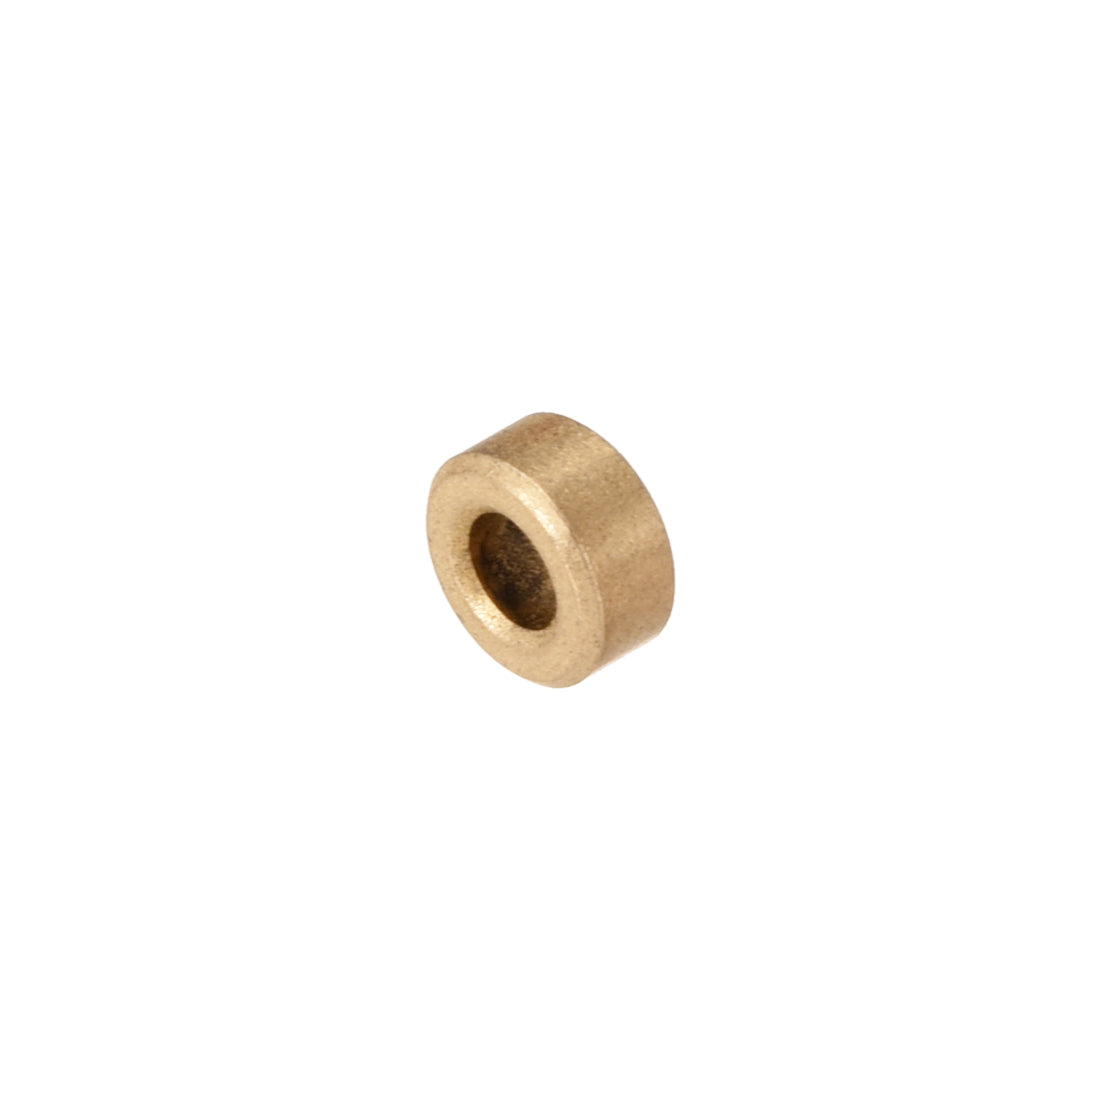 uxcell Uxcell Bearing Sleeve Self-Lubricating Sintered Bronze Bushings